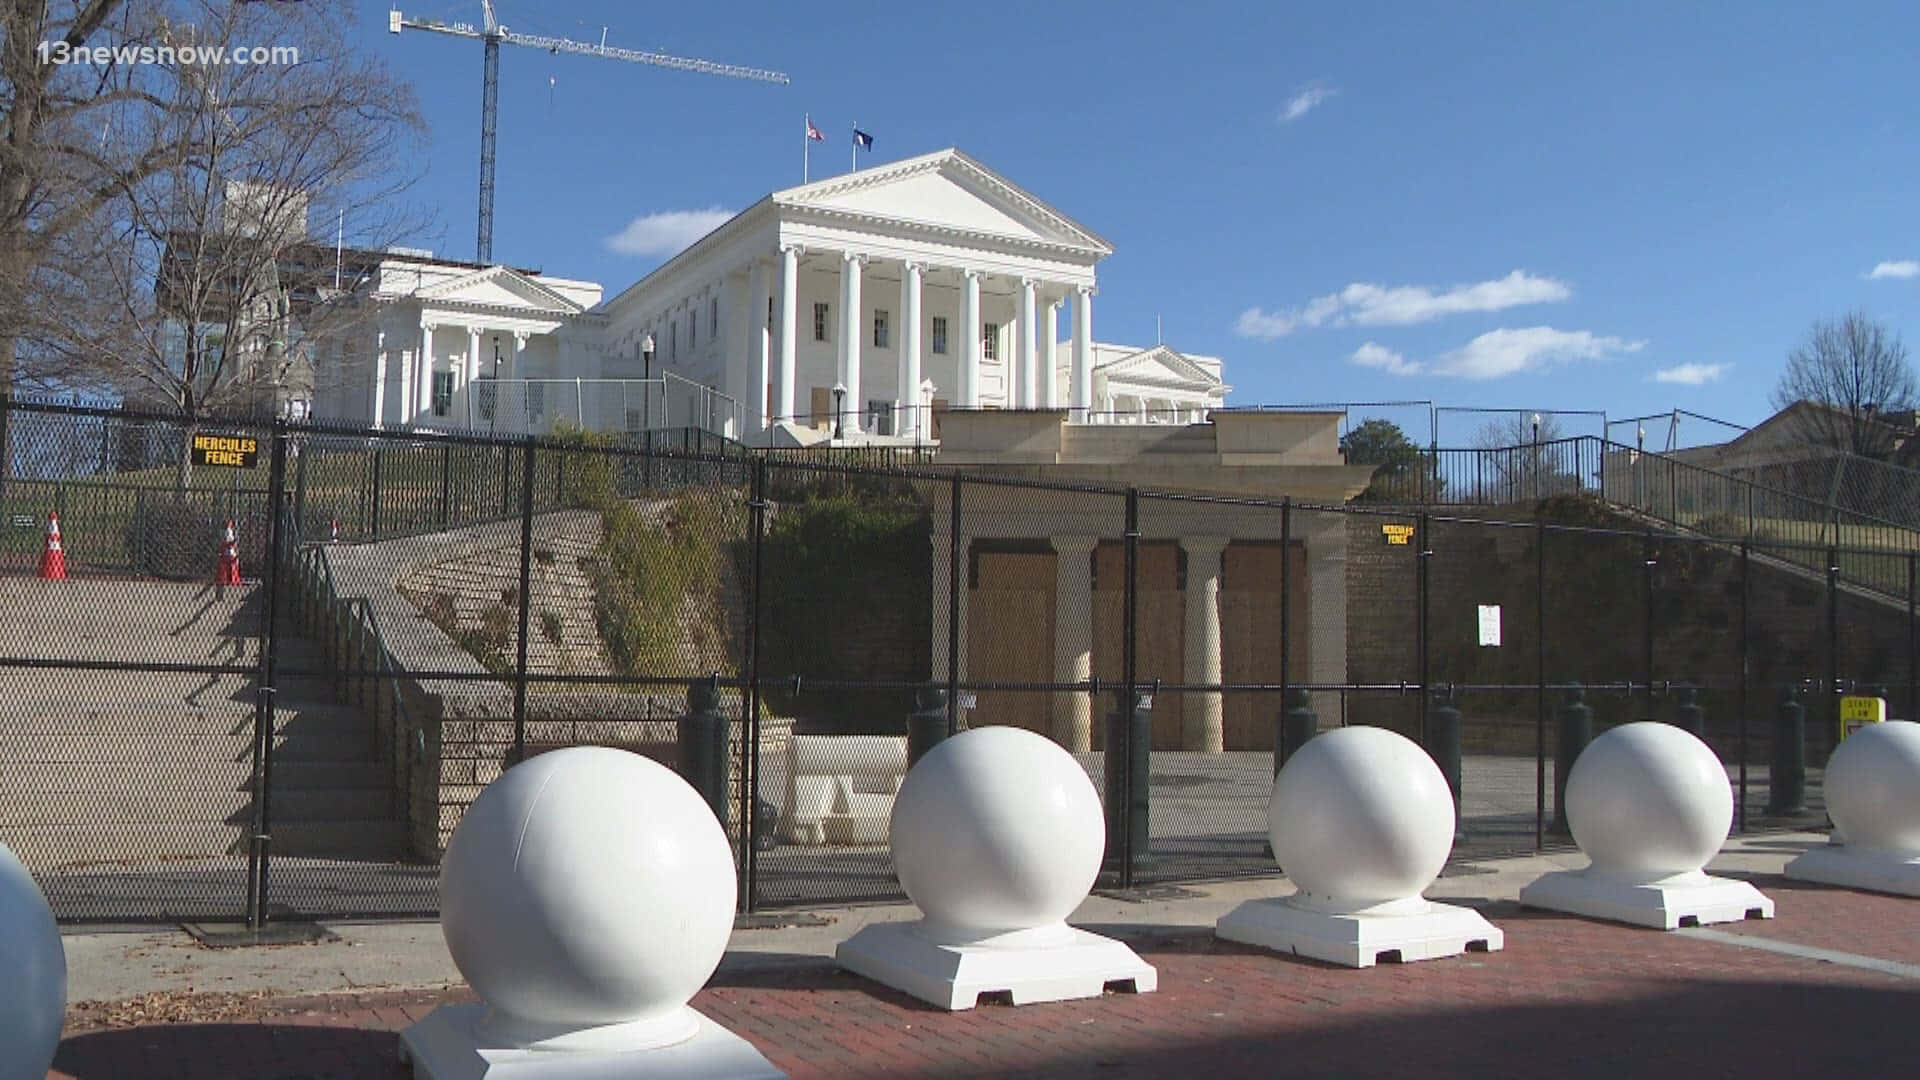 The Round-shaped Structures At The Virginia State Capitol Wallpaper